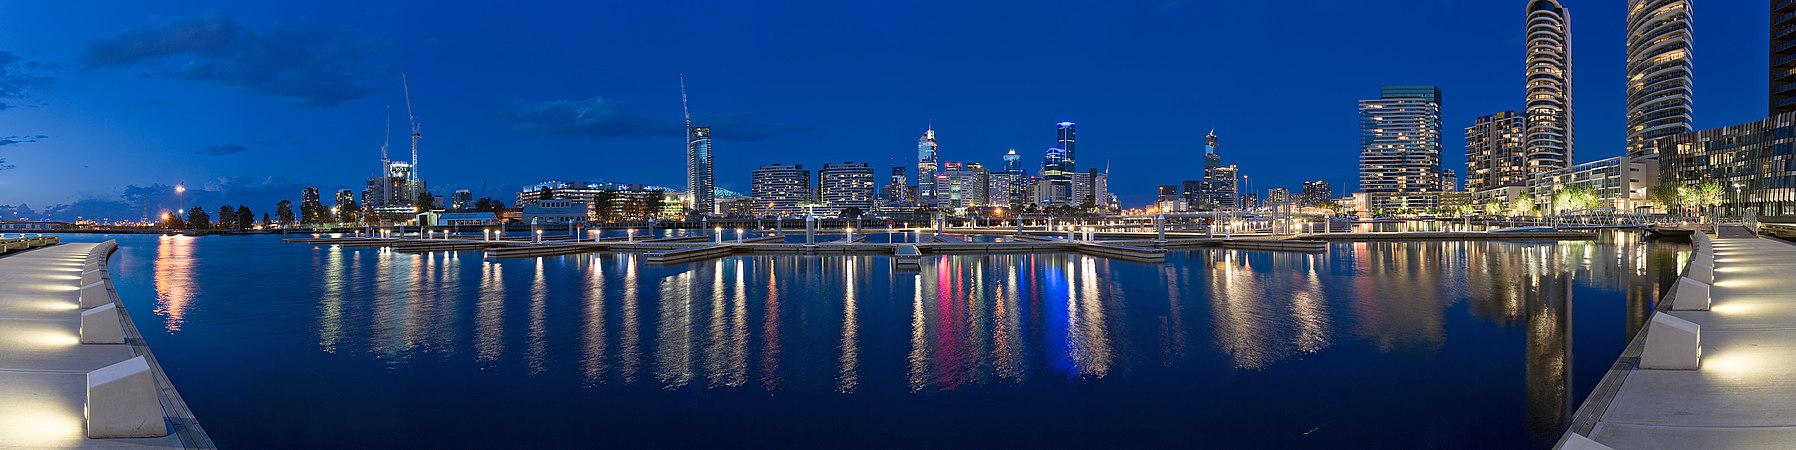 Docklands, Victoria from Yarra's Edge, by Diliff